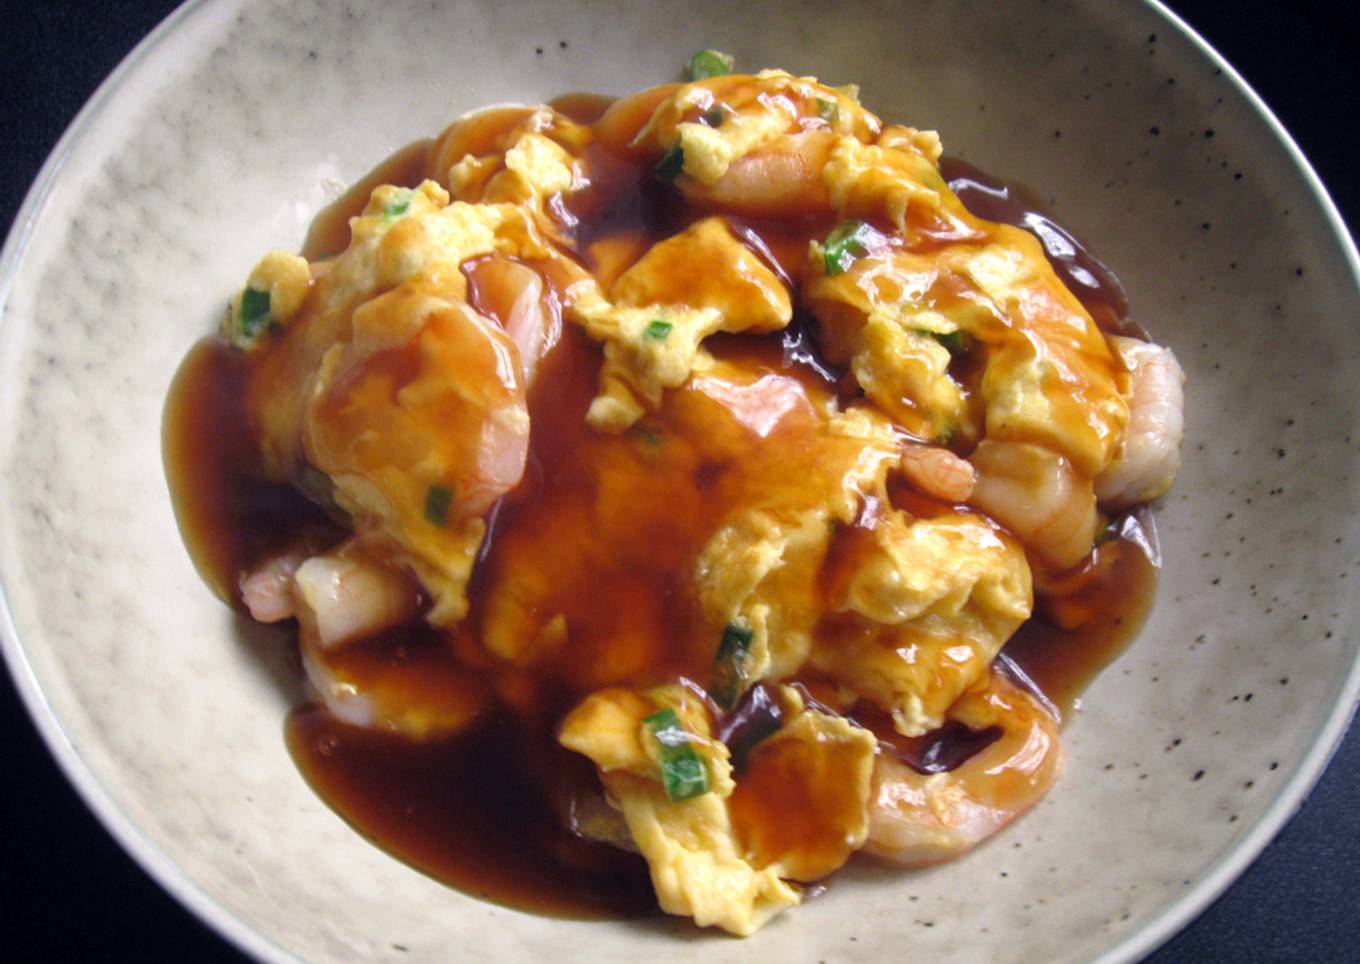 Prawns & Egg with Sweet Sour Sauce